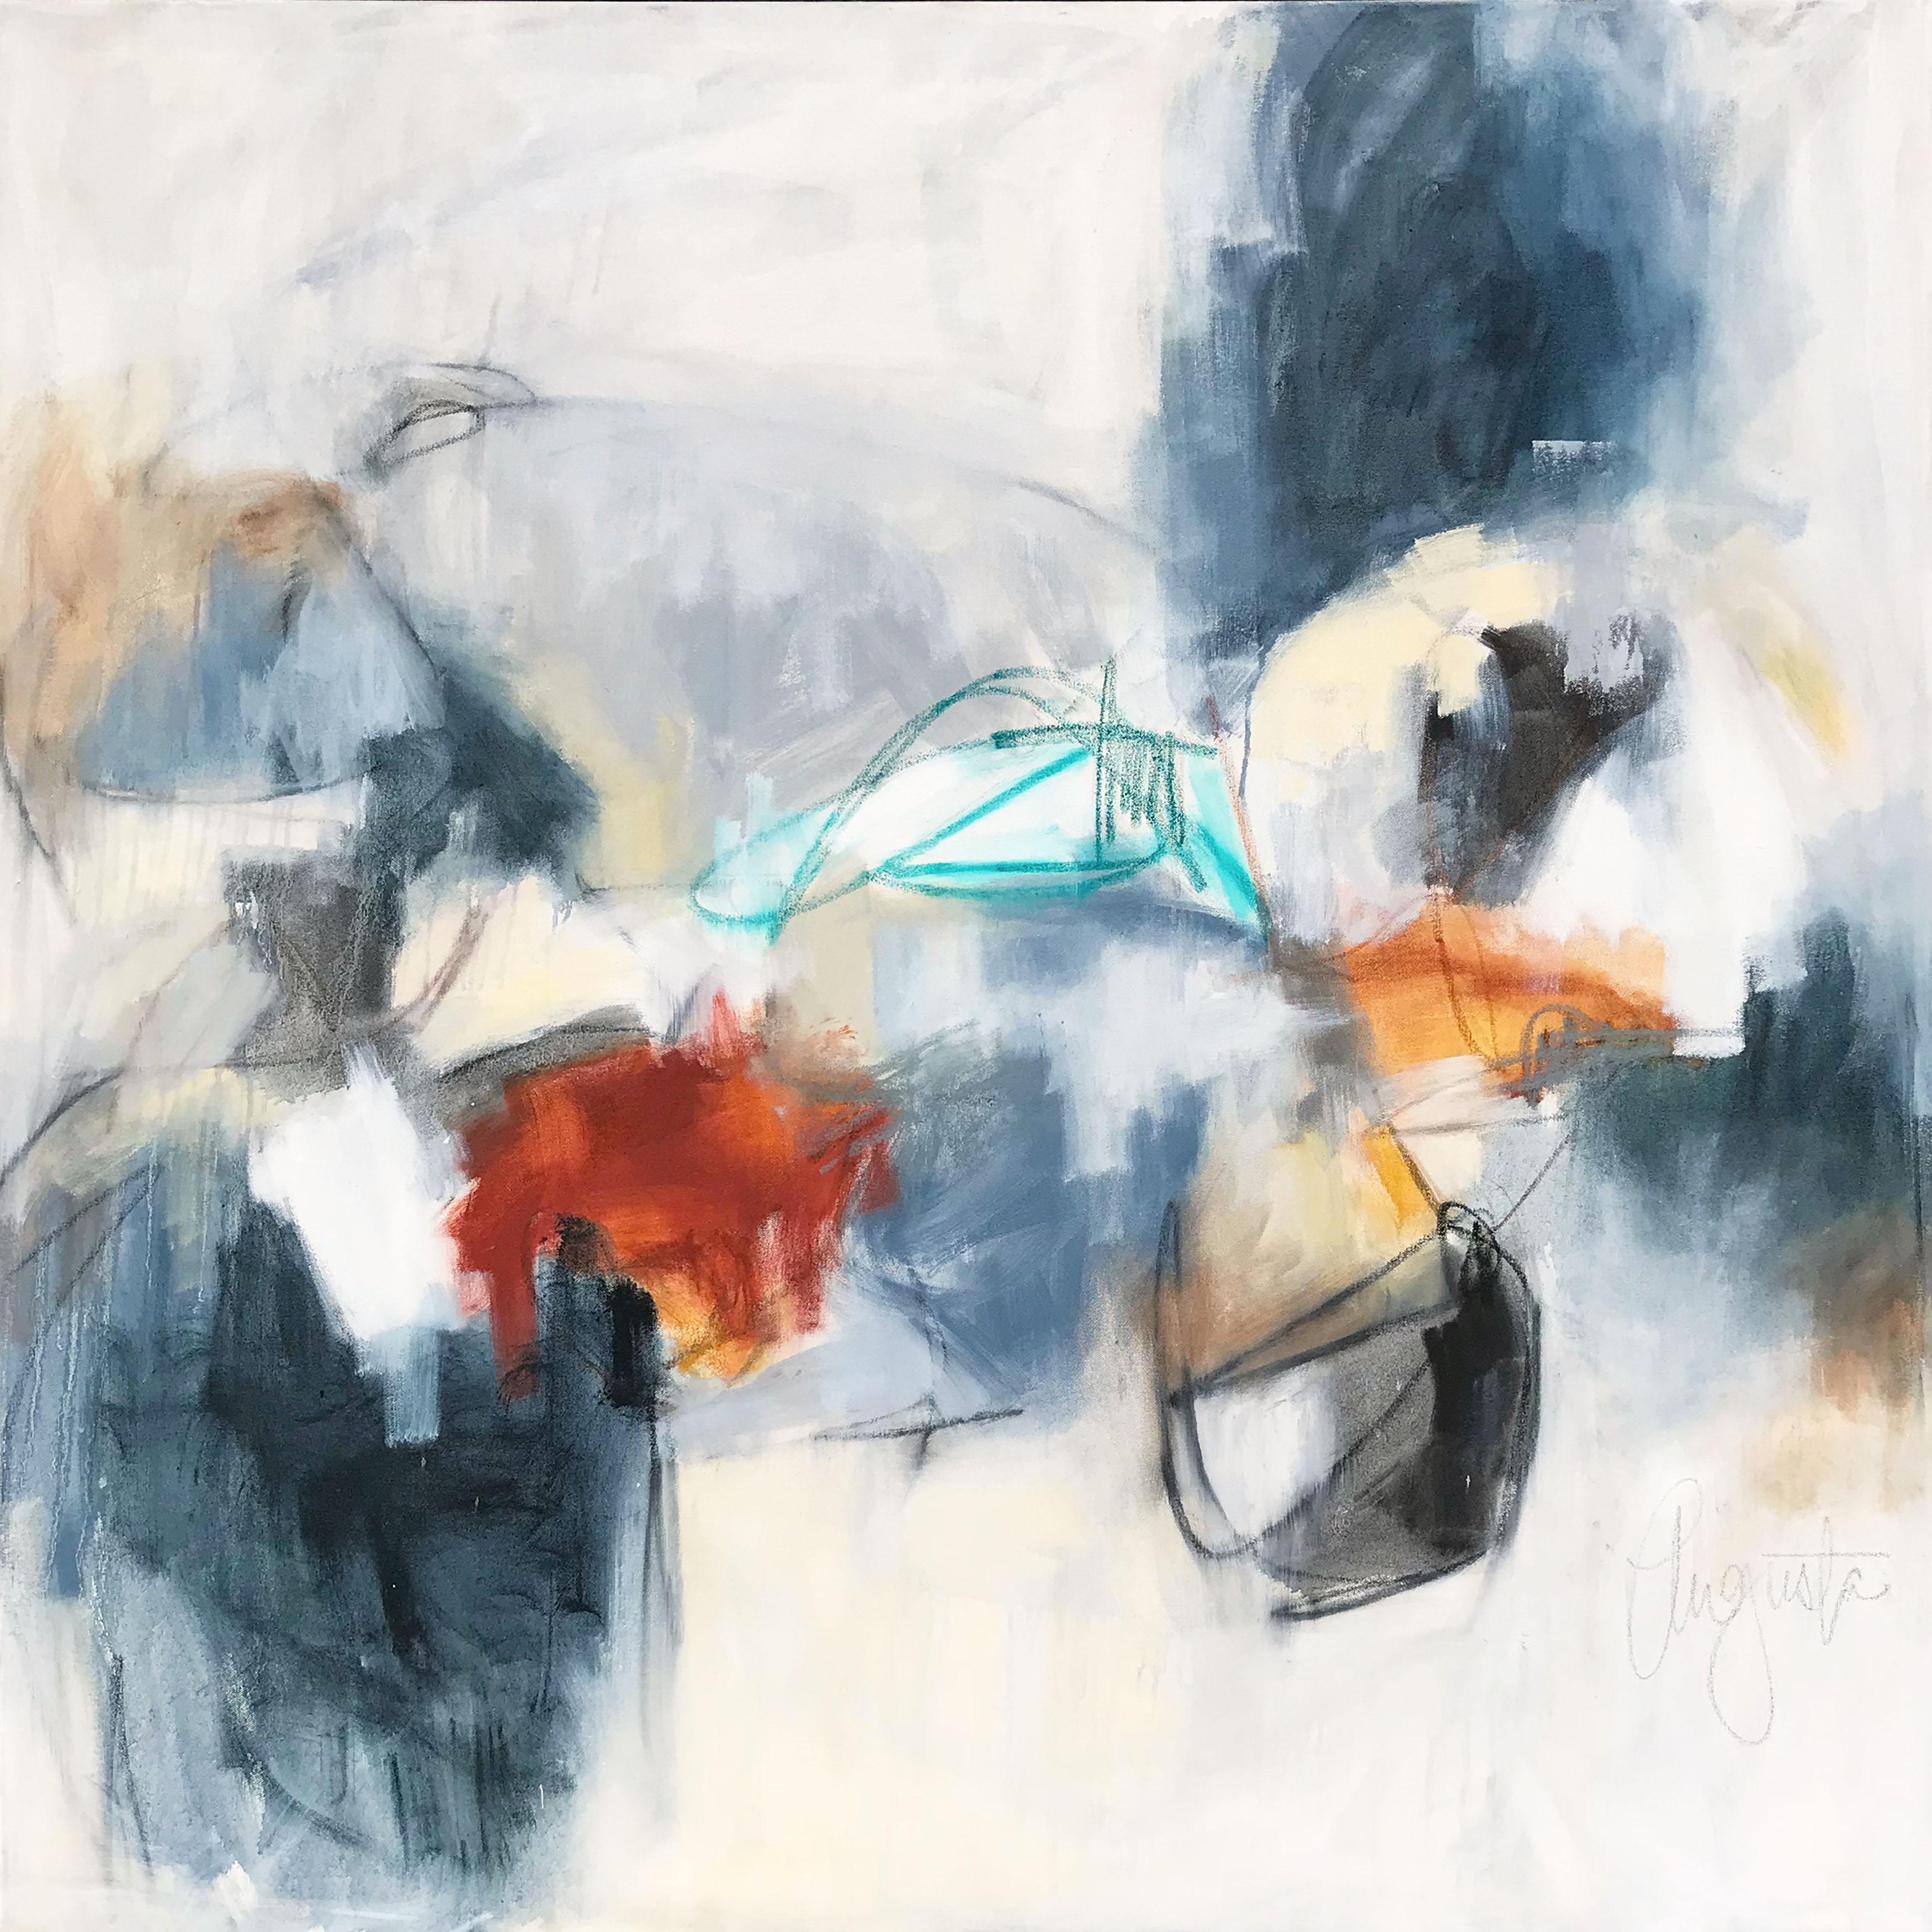 'Marais' is an acrylic and mixed media on canvas abstract painting created by American artist Augusta Wilson in 2018. Featuring a palette mostly made of white, grey and black colors, beautifully accented with strokes of red and orange, the painting